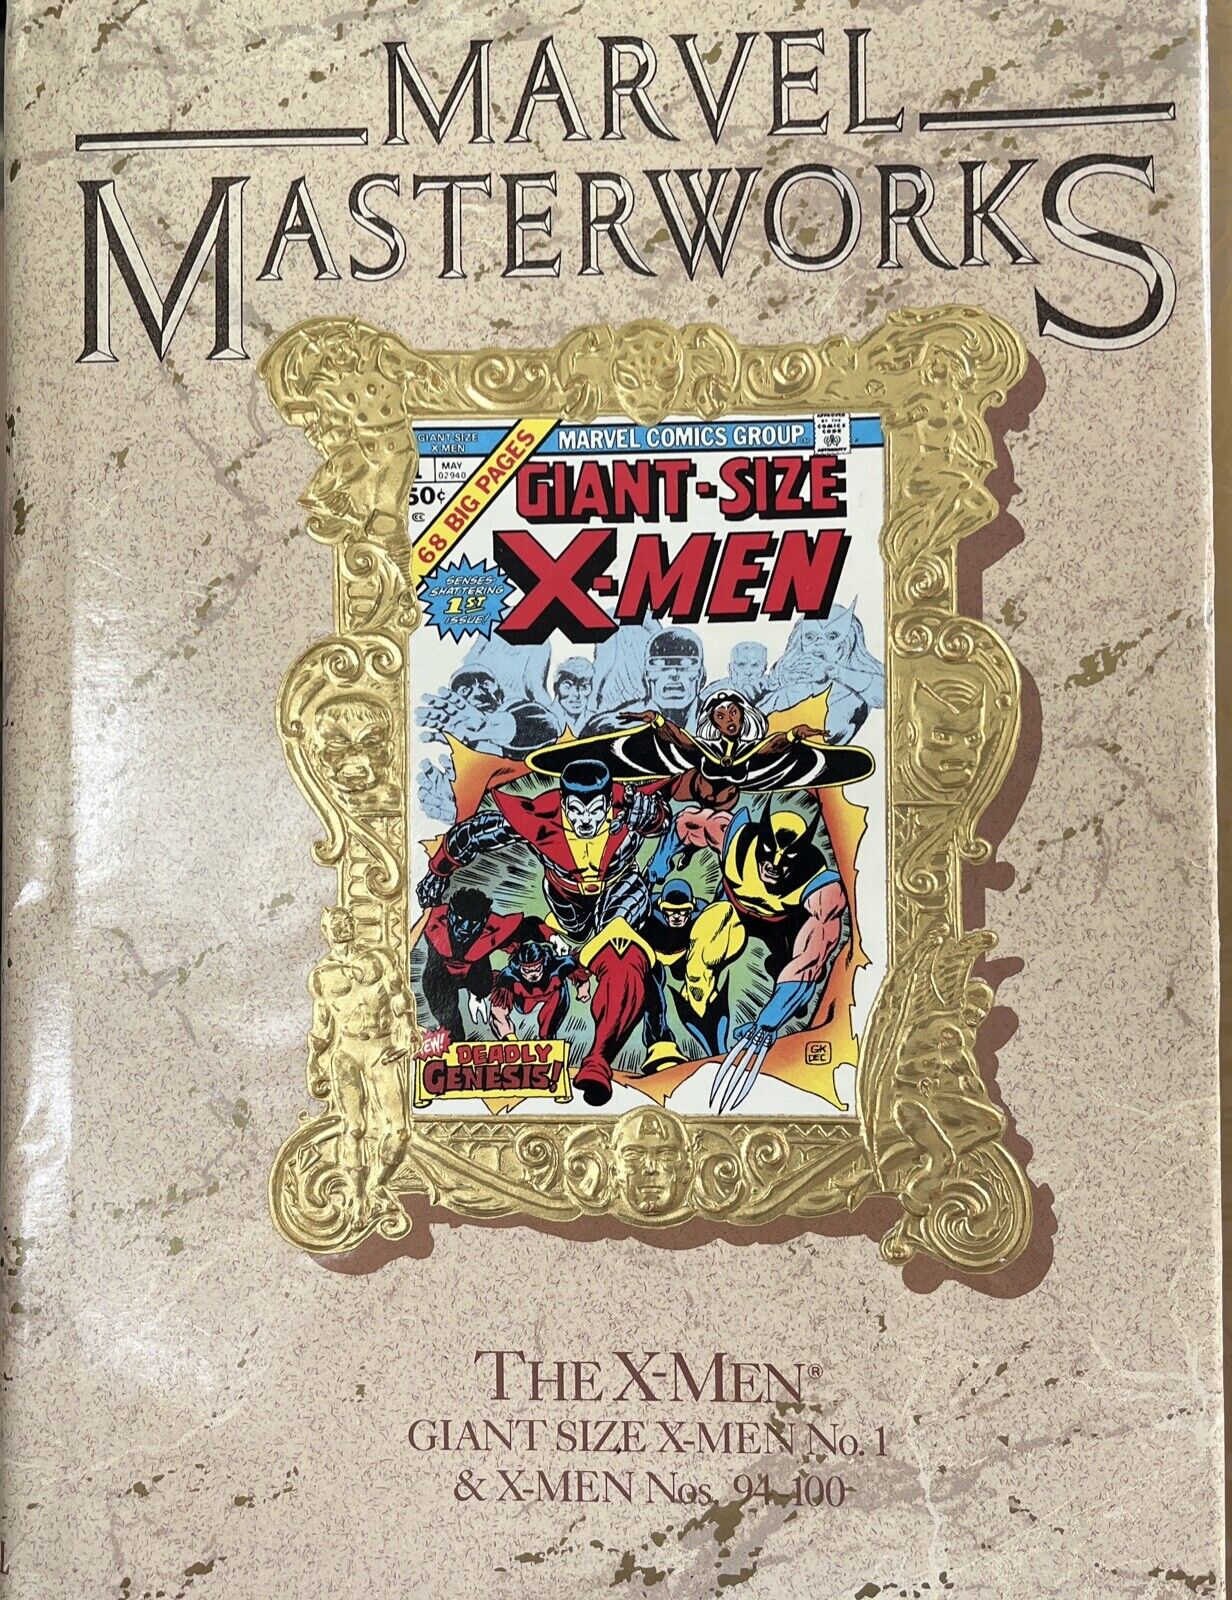 Marvel Masterworks #11  collects X-Men 94-100, Giant Size X-Men #1 HARDCOVER